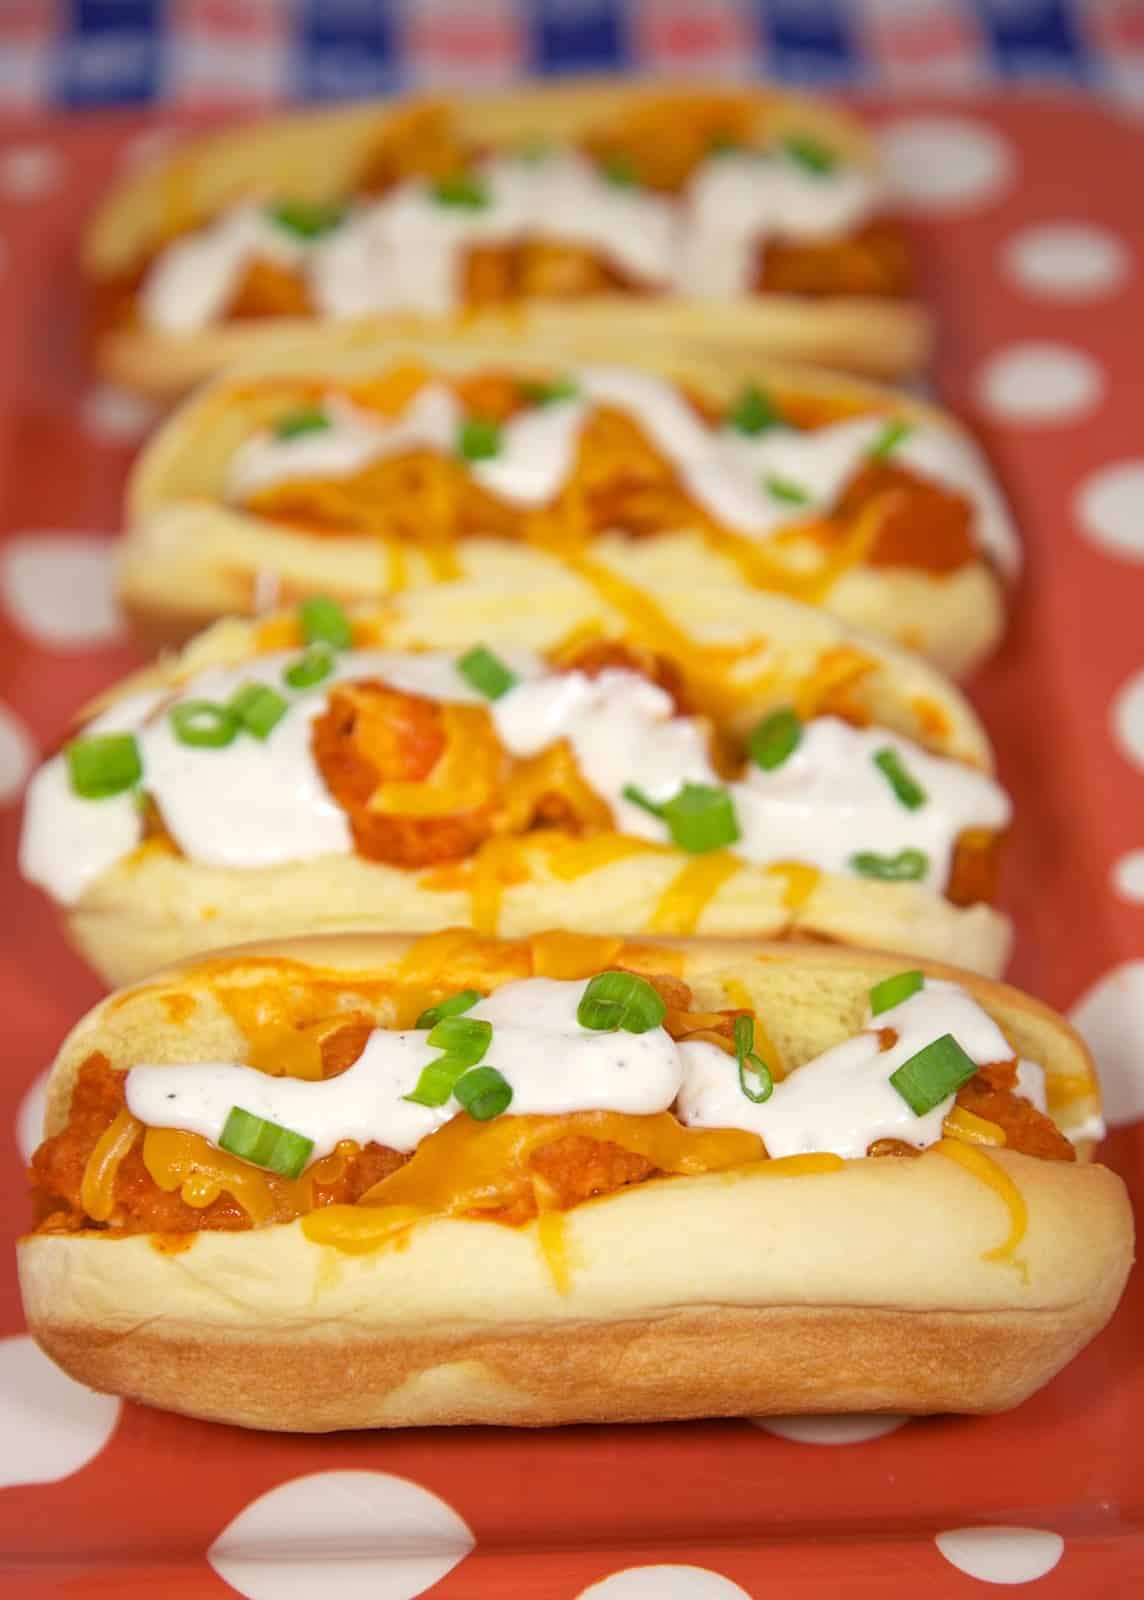 Buffalo Chicken Bird Dogs Recipe - chicken tenders, buffalo sauce, cheese and Ranch served in hot dog buns. Our favorite way to eat chicken tenders!